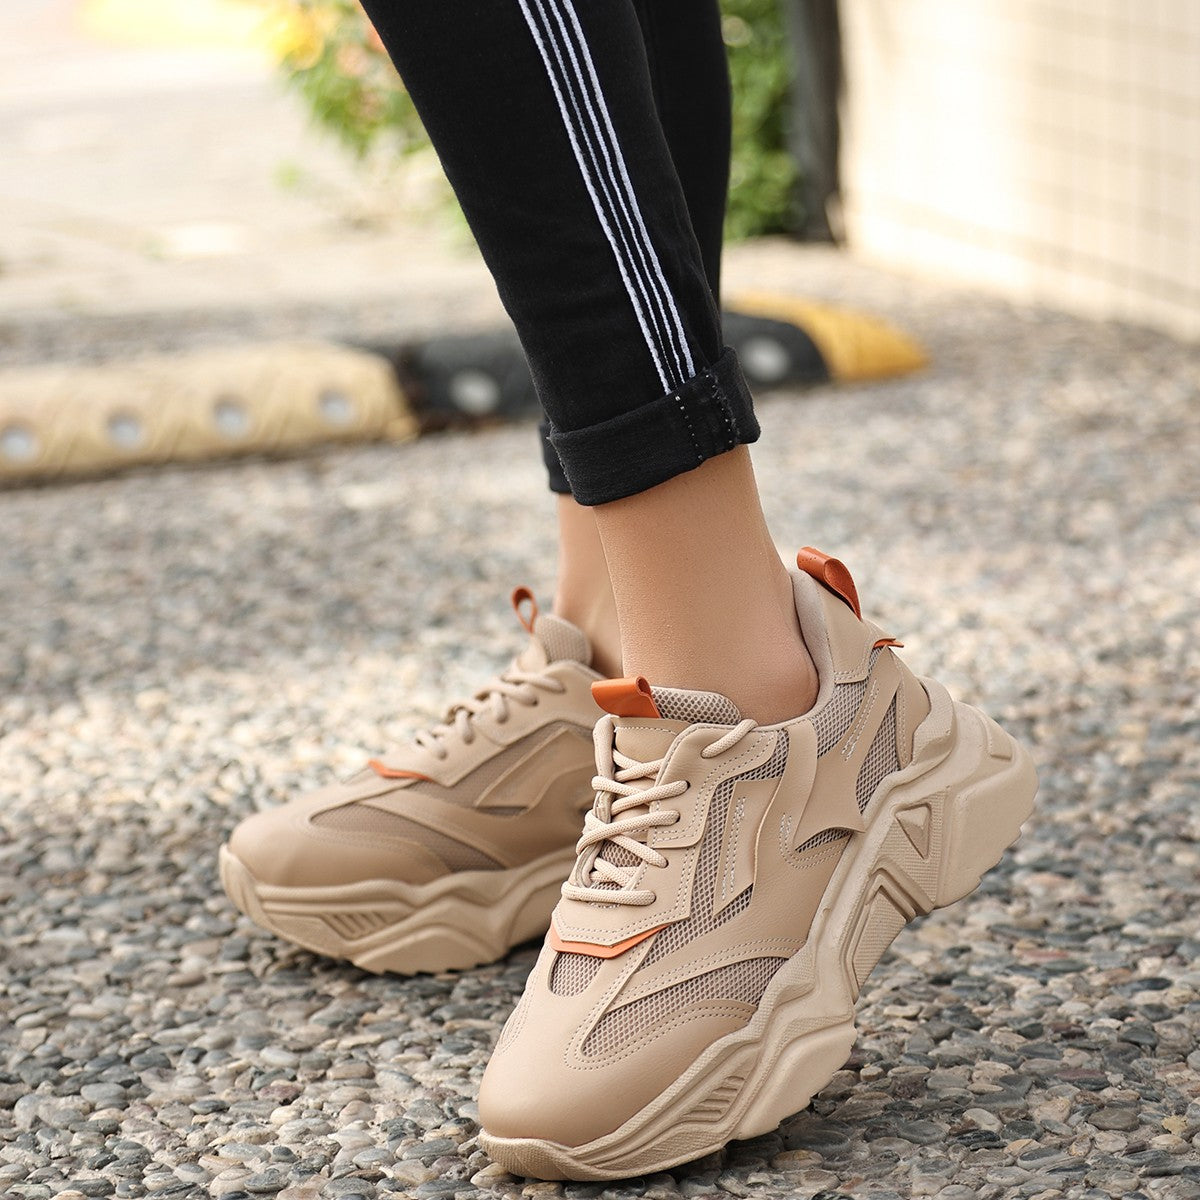 Women's Nude Skin Lace-Up Sports Shoes - STREETMODE ™